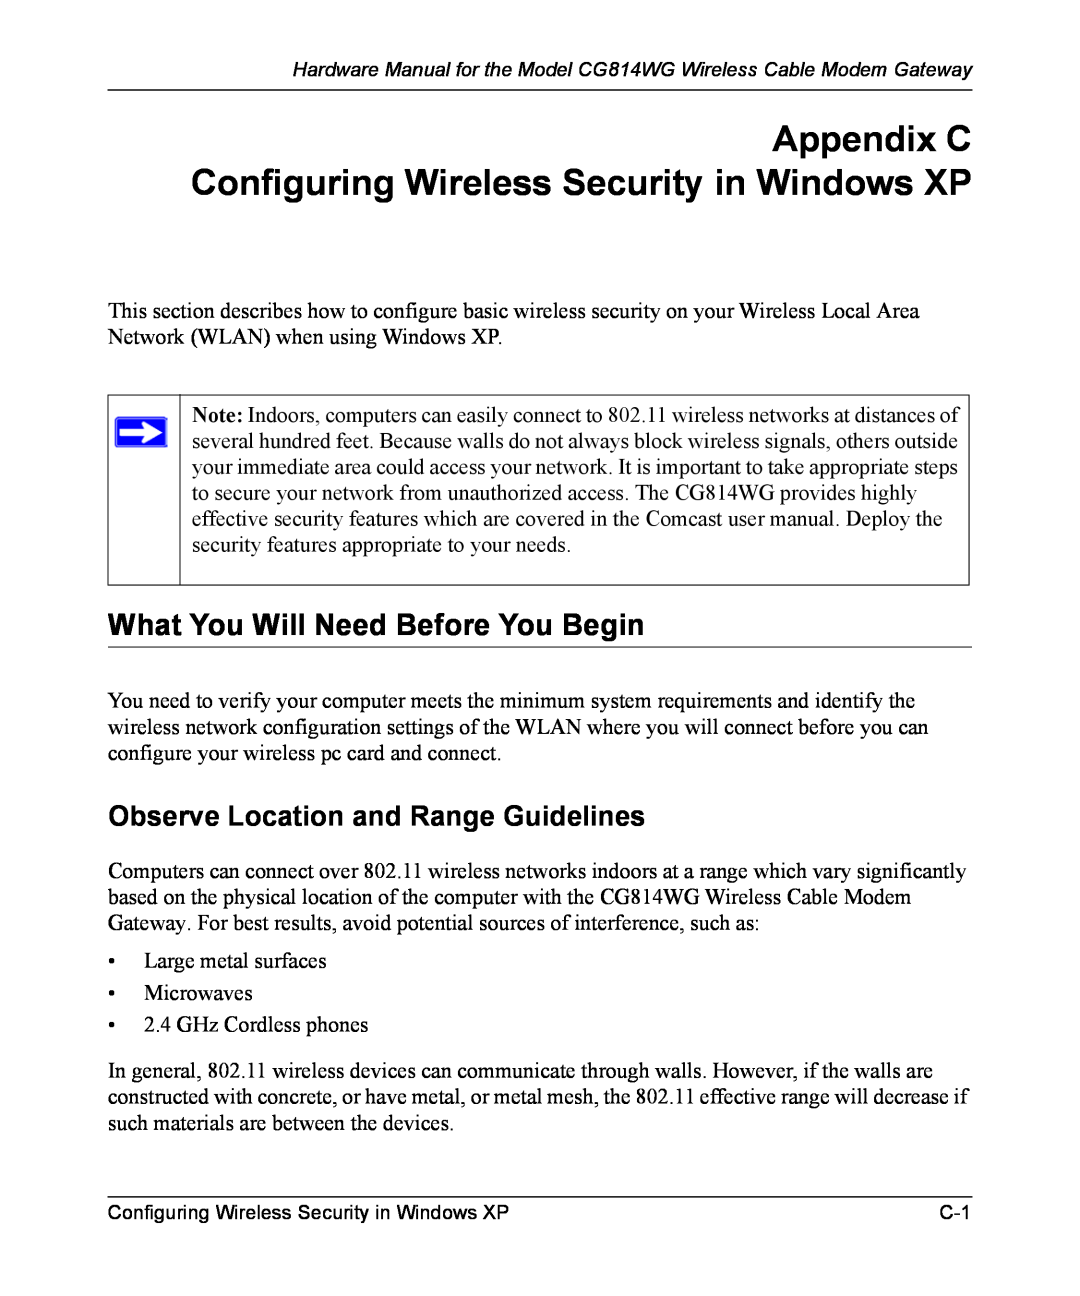 NETGEAR CG814WG manual Appendix C Configuring Wireless Security in Windows XP, What You Will Need Before You Begin 